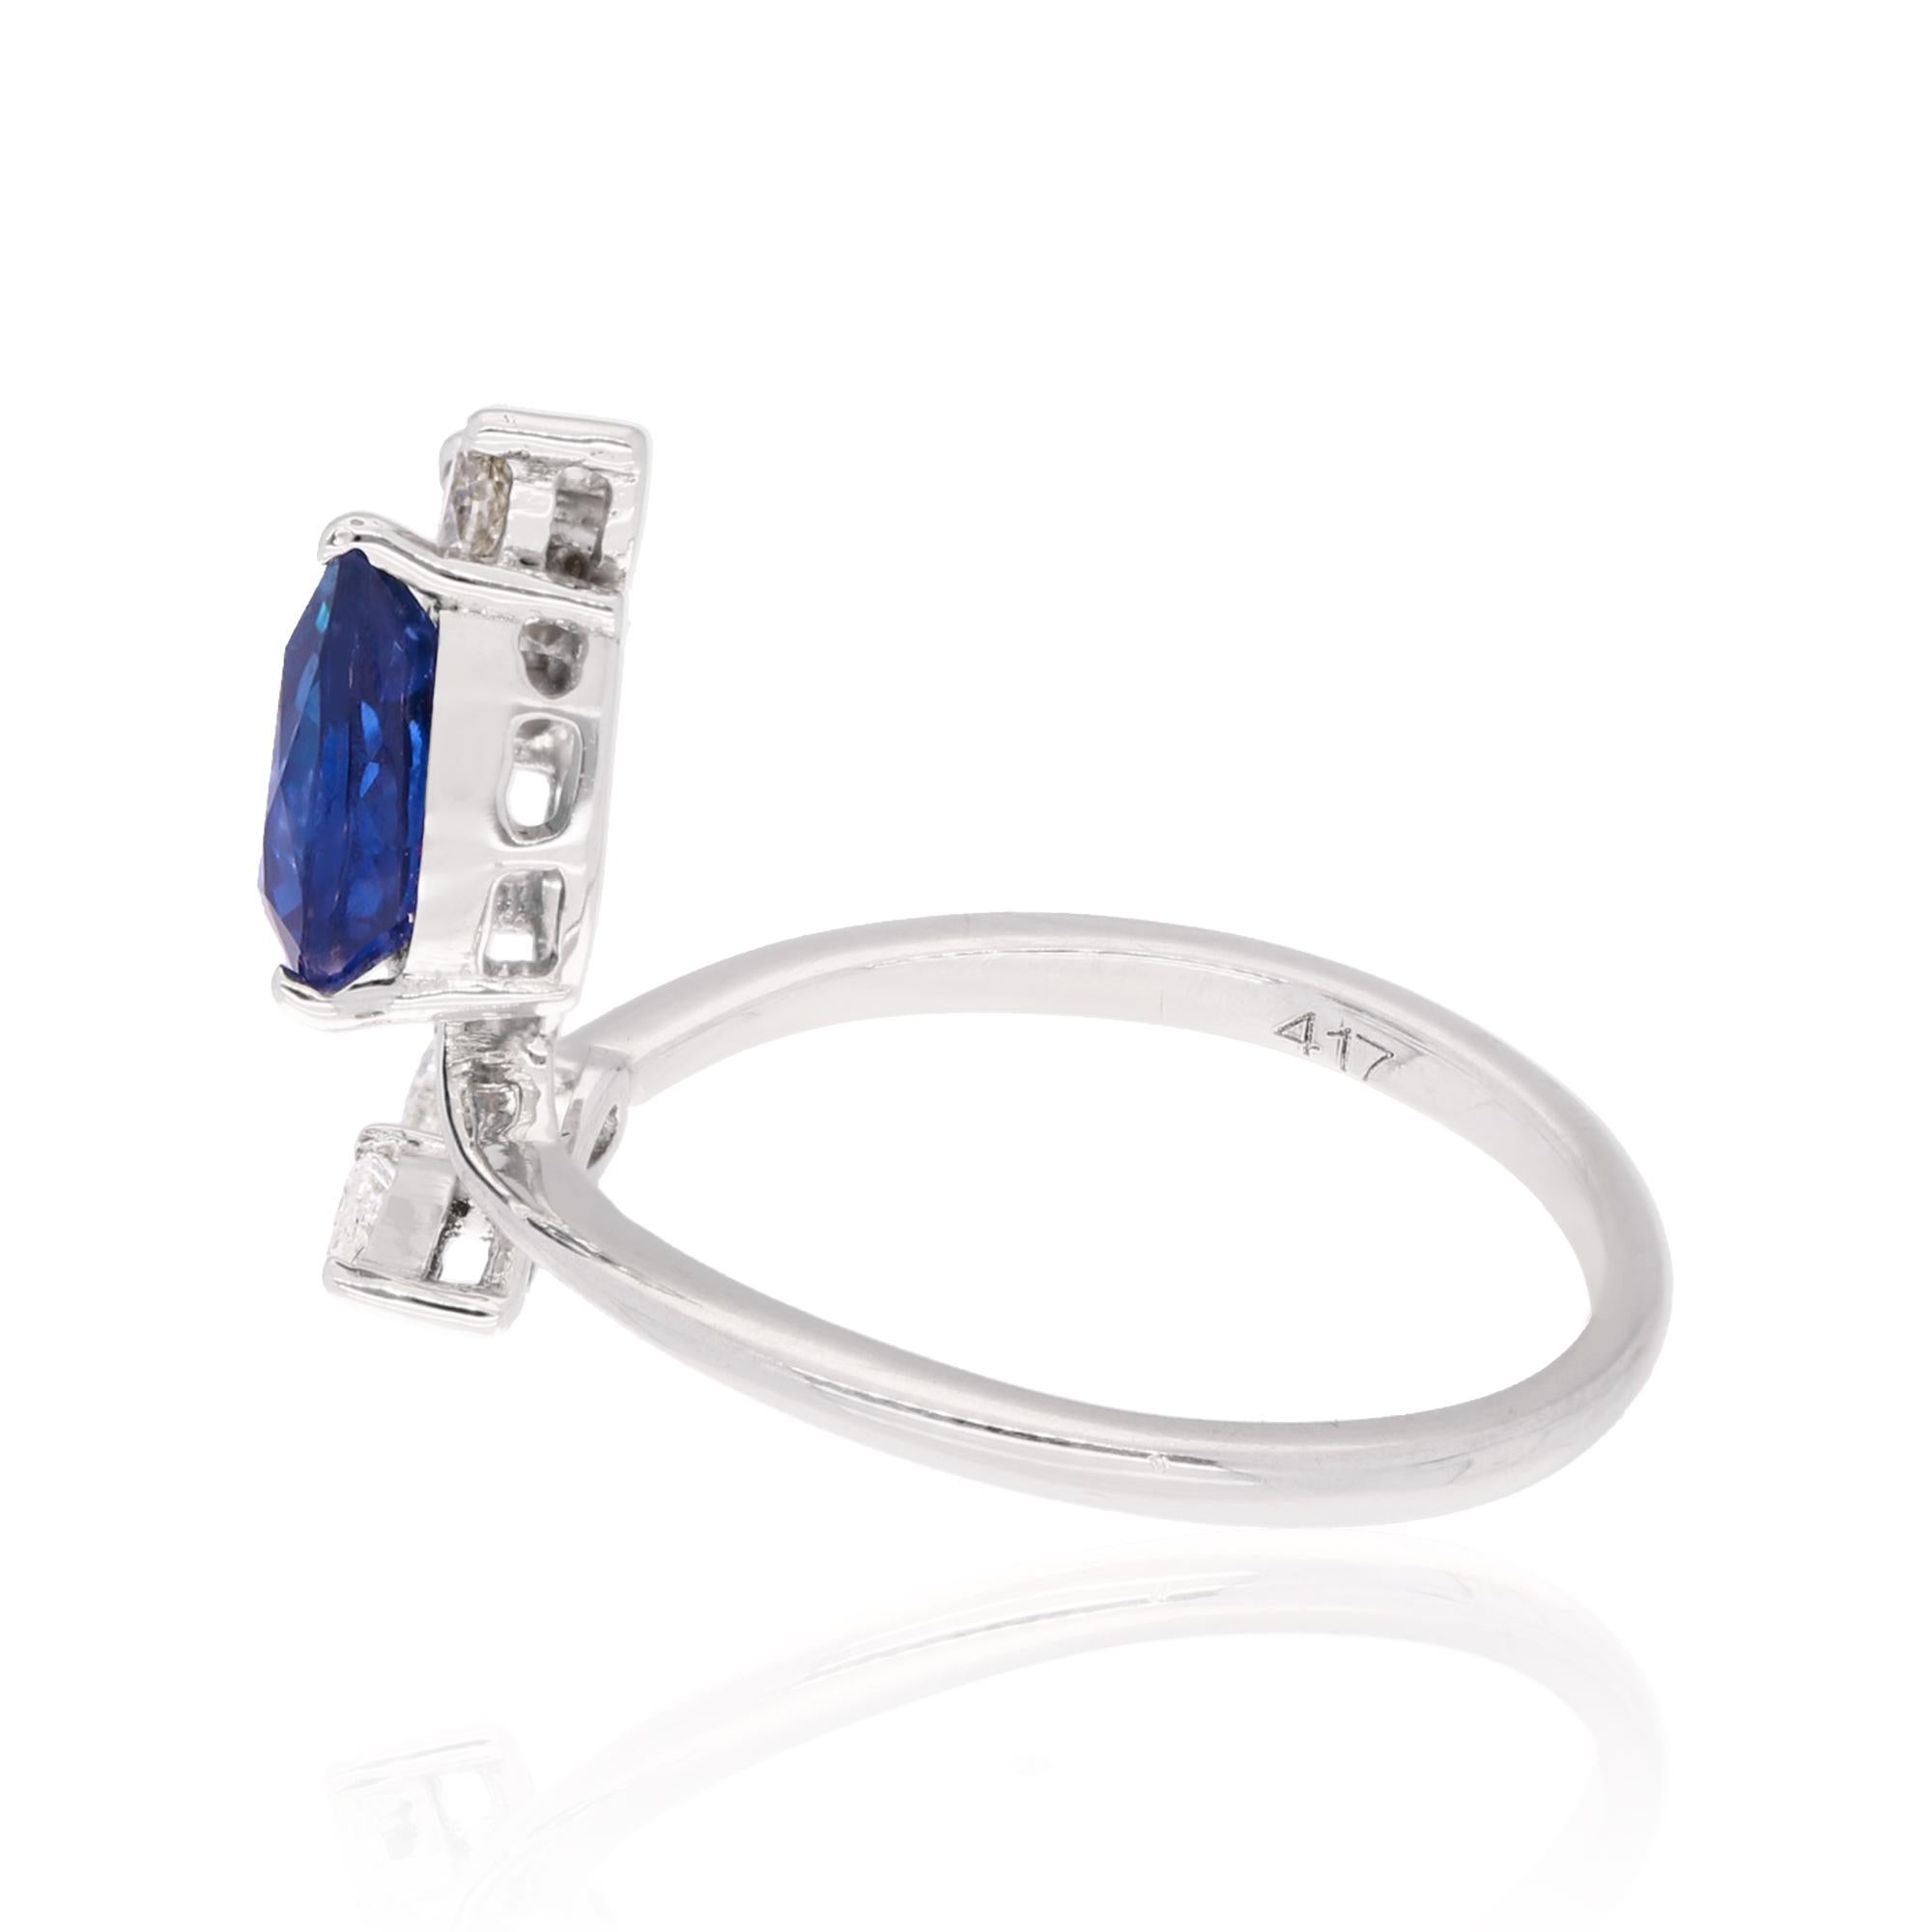 Item Code :- STR-2064
Gross Wt. :- 2.23 gm
10k White Gold Wt. :- 1.90 gm
Natural Diamond Wt. :- 0.22 Ct. ( AVERAGE DIAMOND CLARITY SI1-SI2 & COLOR H-I )
Blue Sapphire Wt. :- 1.44 Ct.
Ring Size :- 7 US

✦ Sizing
.....................
We can adjust